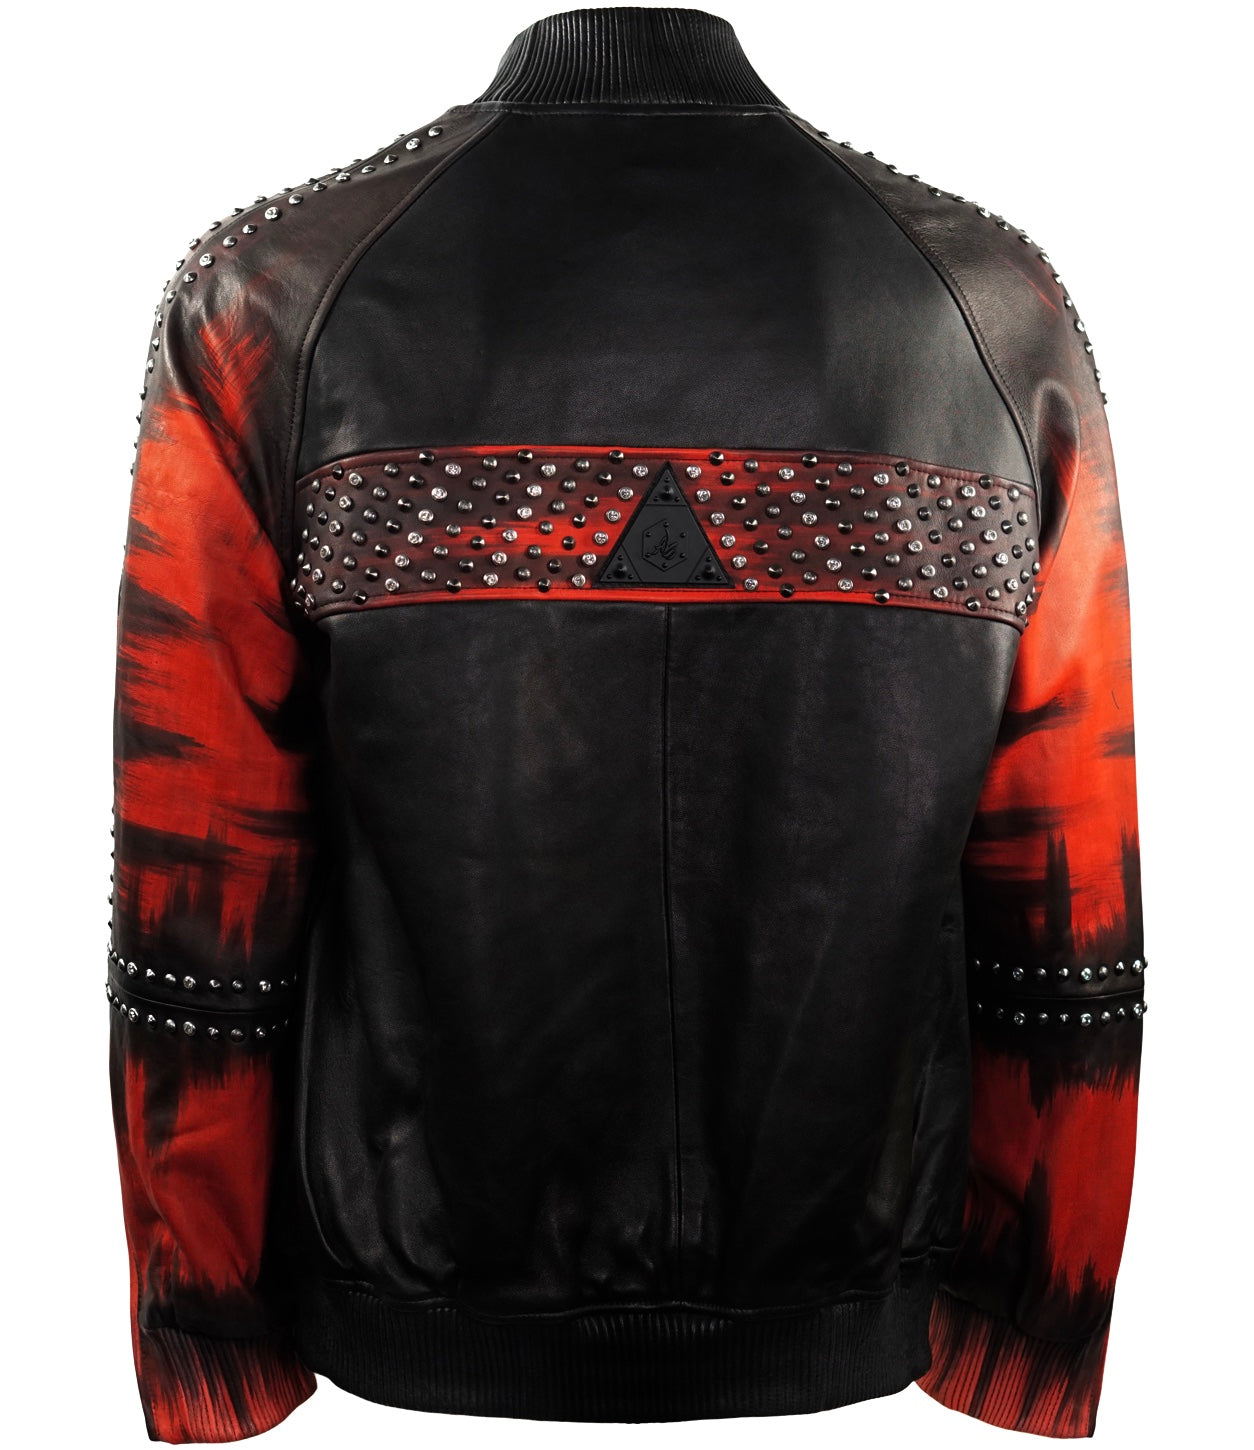 Artistry and Edge Hand-Painted Bomber